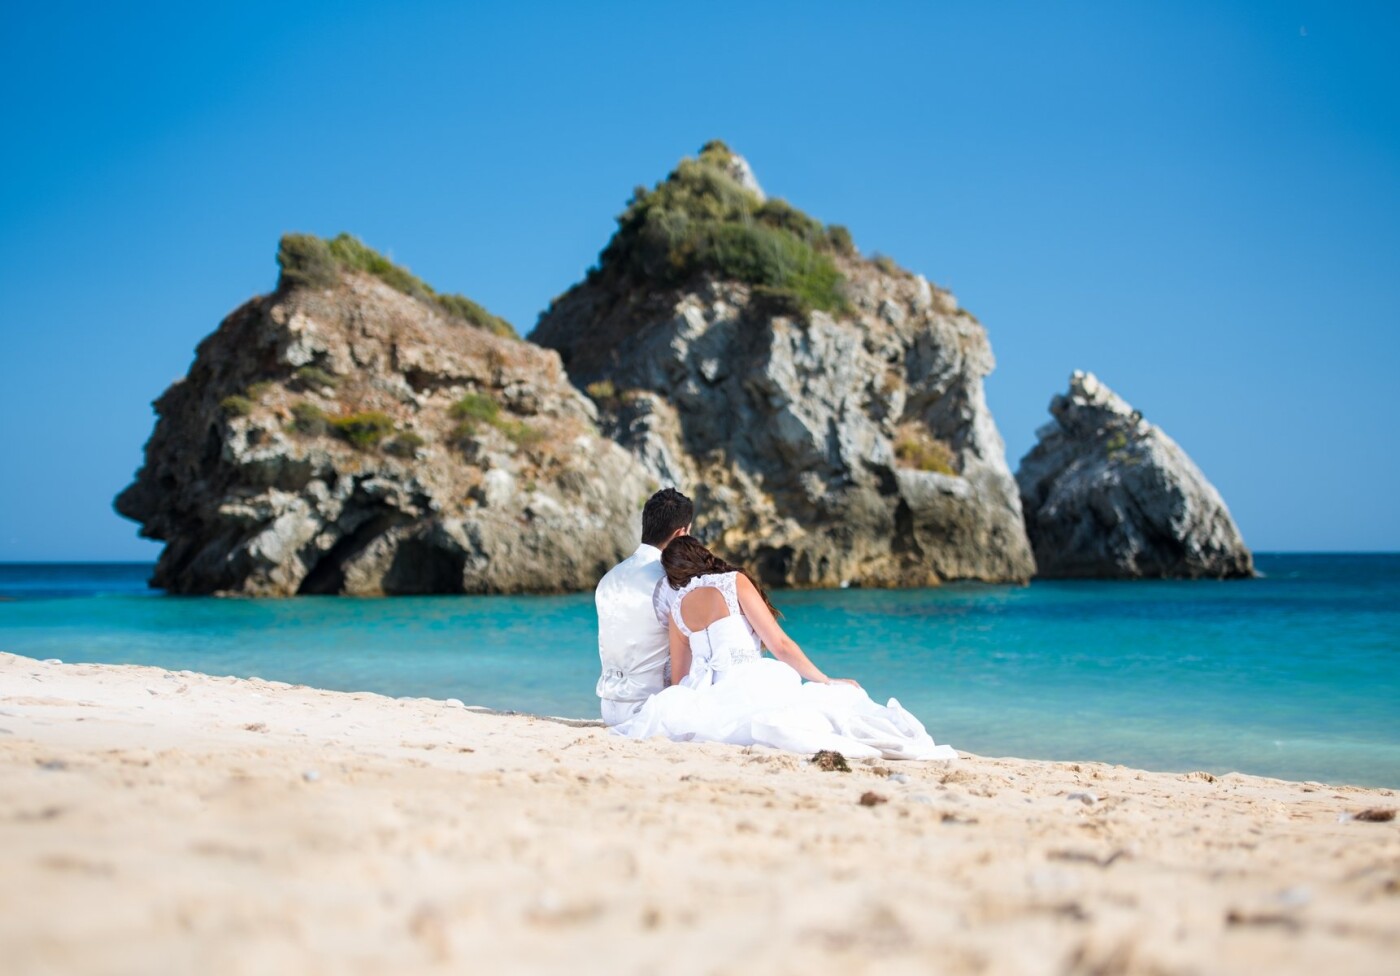 This photo is part of Tania & Luis trash the dress photoshoot.<br />
This great couple defied me and my team to this amazing shoot at Sesimbra, Portugal, in the most incredible beach, with an almost impossible access. The trip payed of! The scenery was perfect, as their complicity.